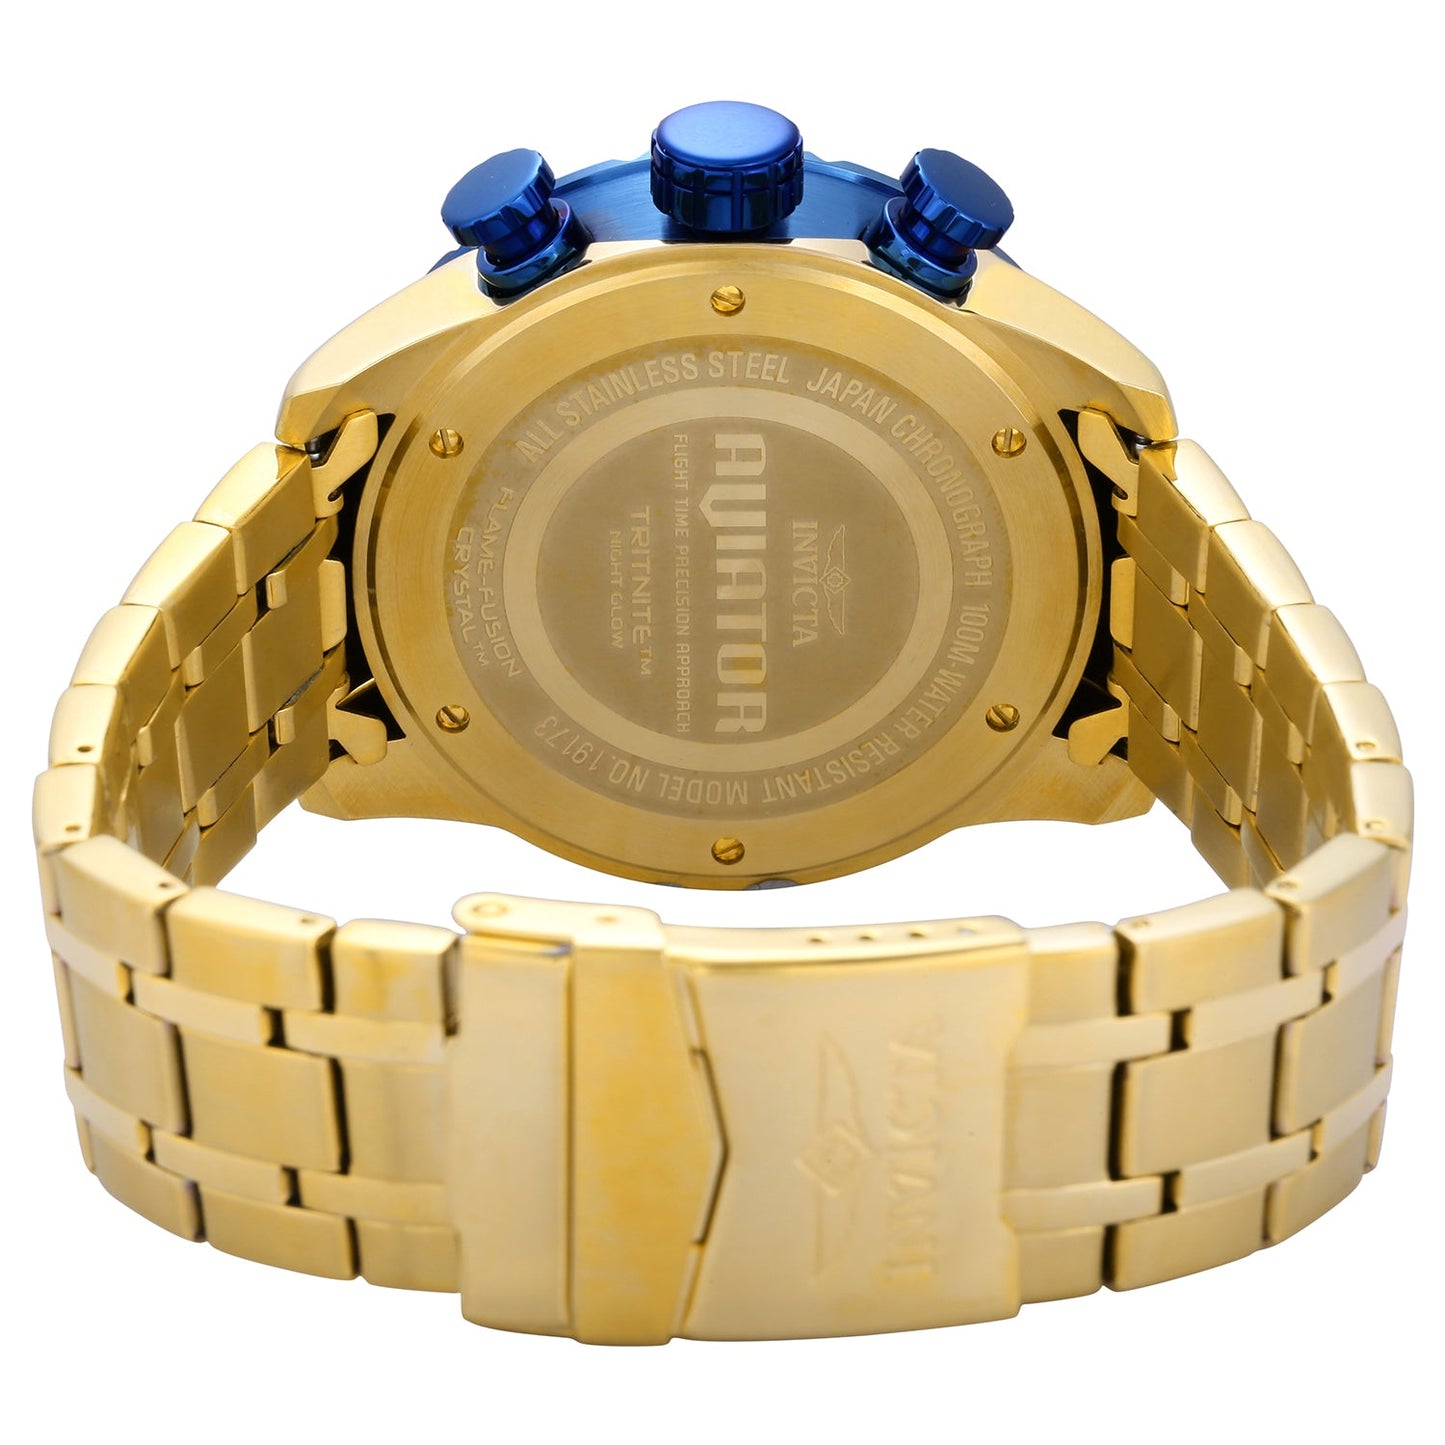 Invicta Aviator 19173 featuring blue dials and gold casing back view